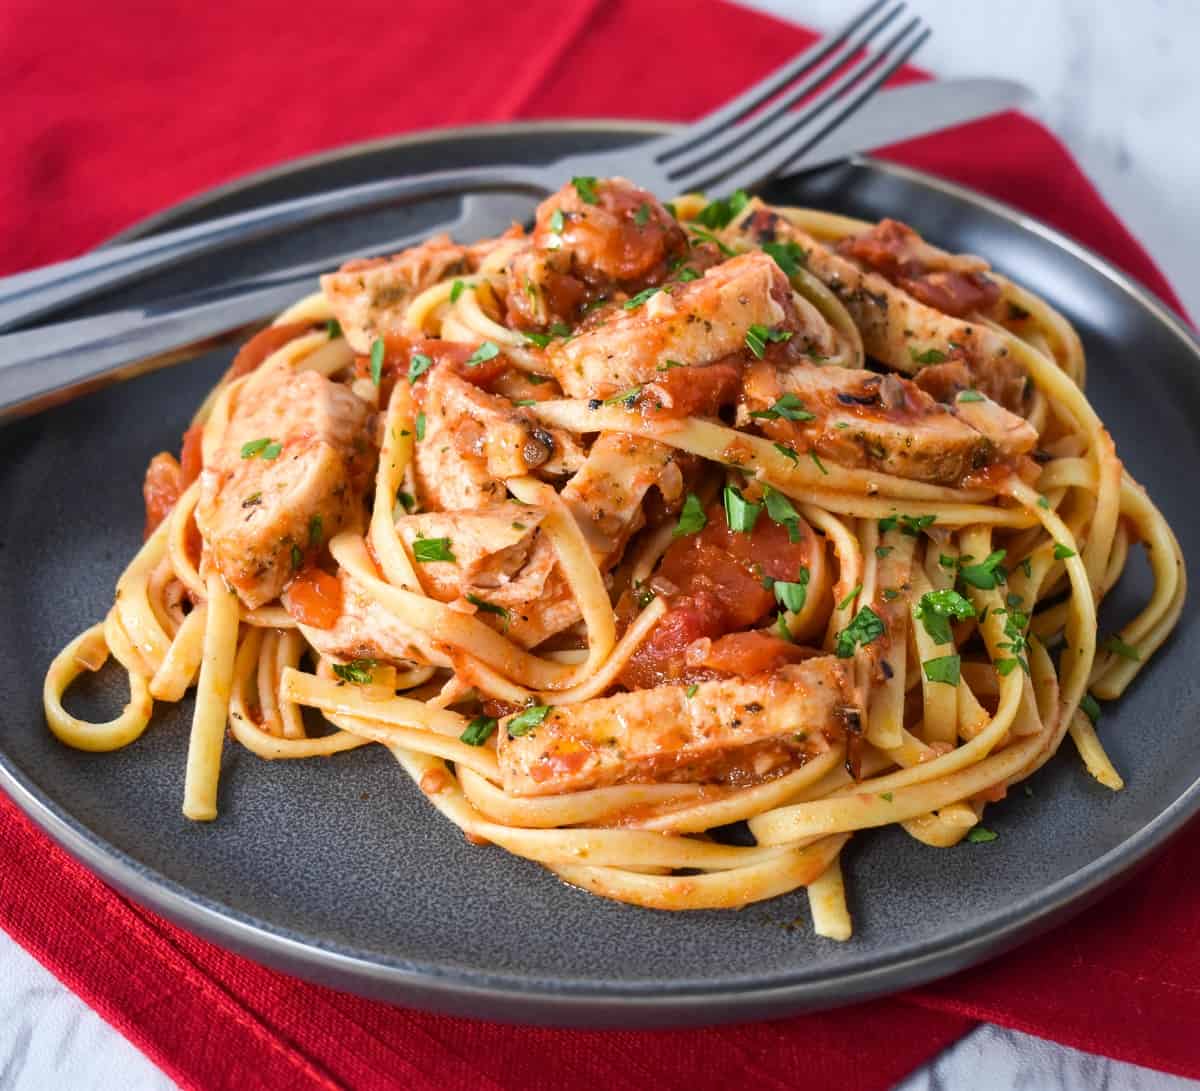 Linguine noodles tossed with tomato sauce, sliced chicken breasts and garnished with parsley, served on a gray plate.